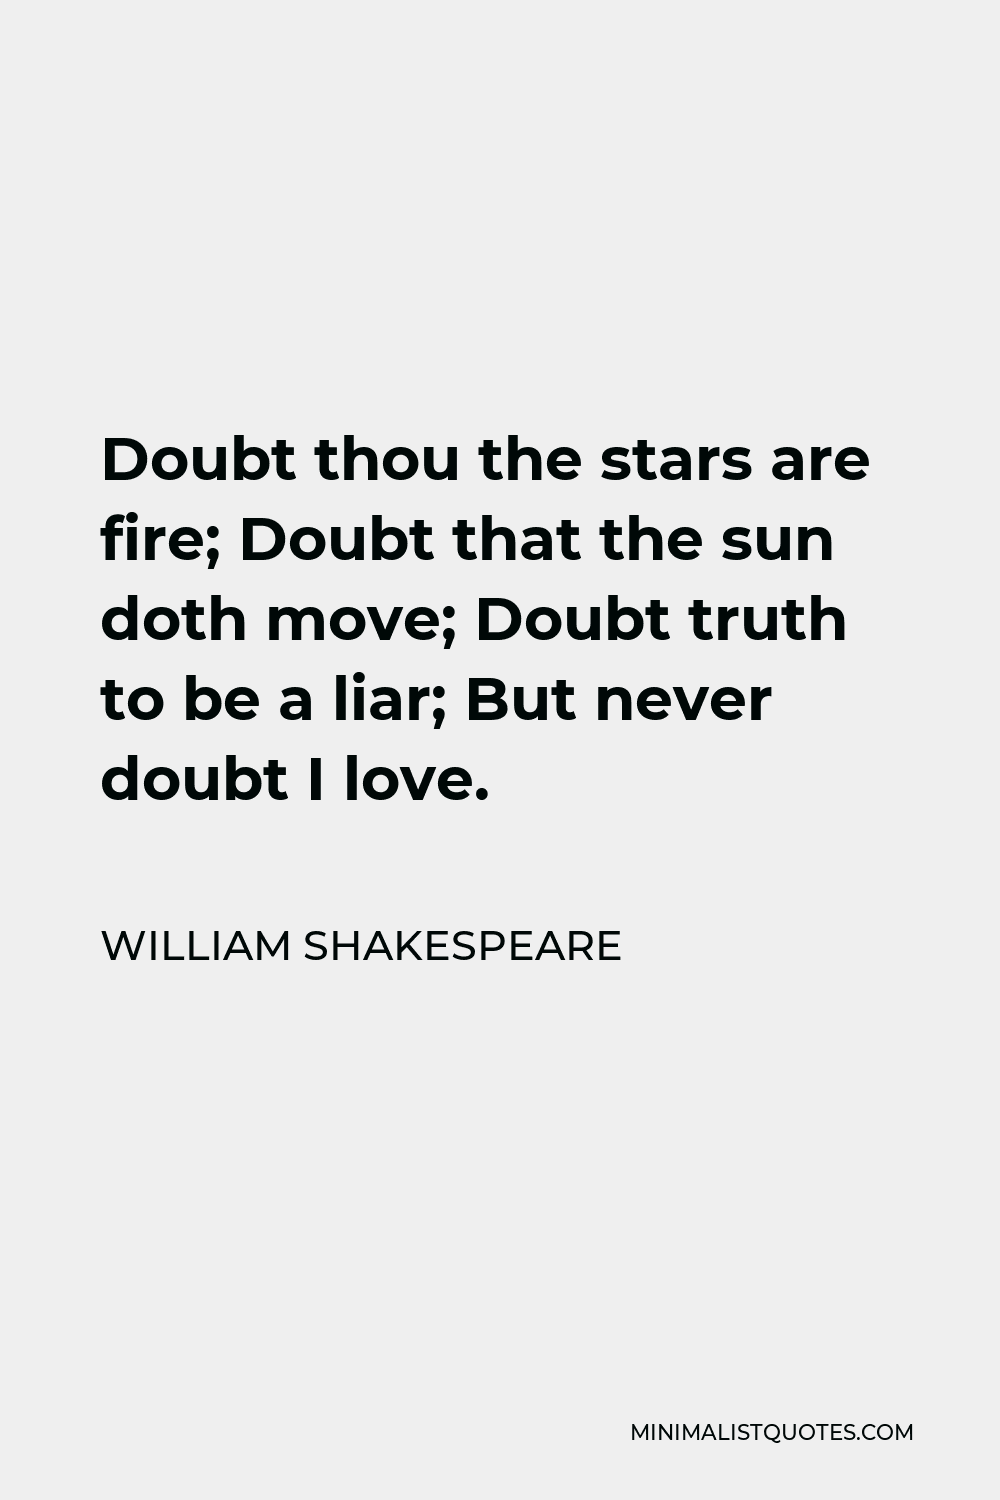 William Shakespeare Quote - Doubt thou the stars are fire; Doubt that the sun doth move; Doubt truth to be a liar; But never doubt I love.